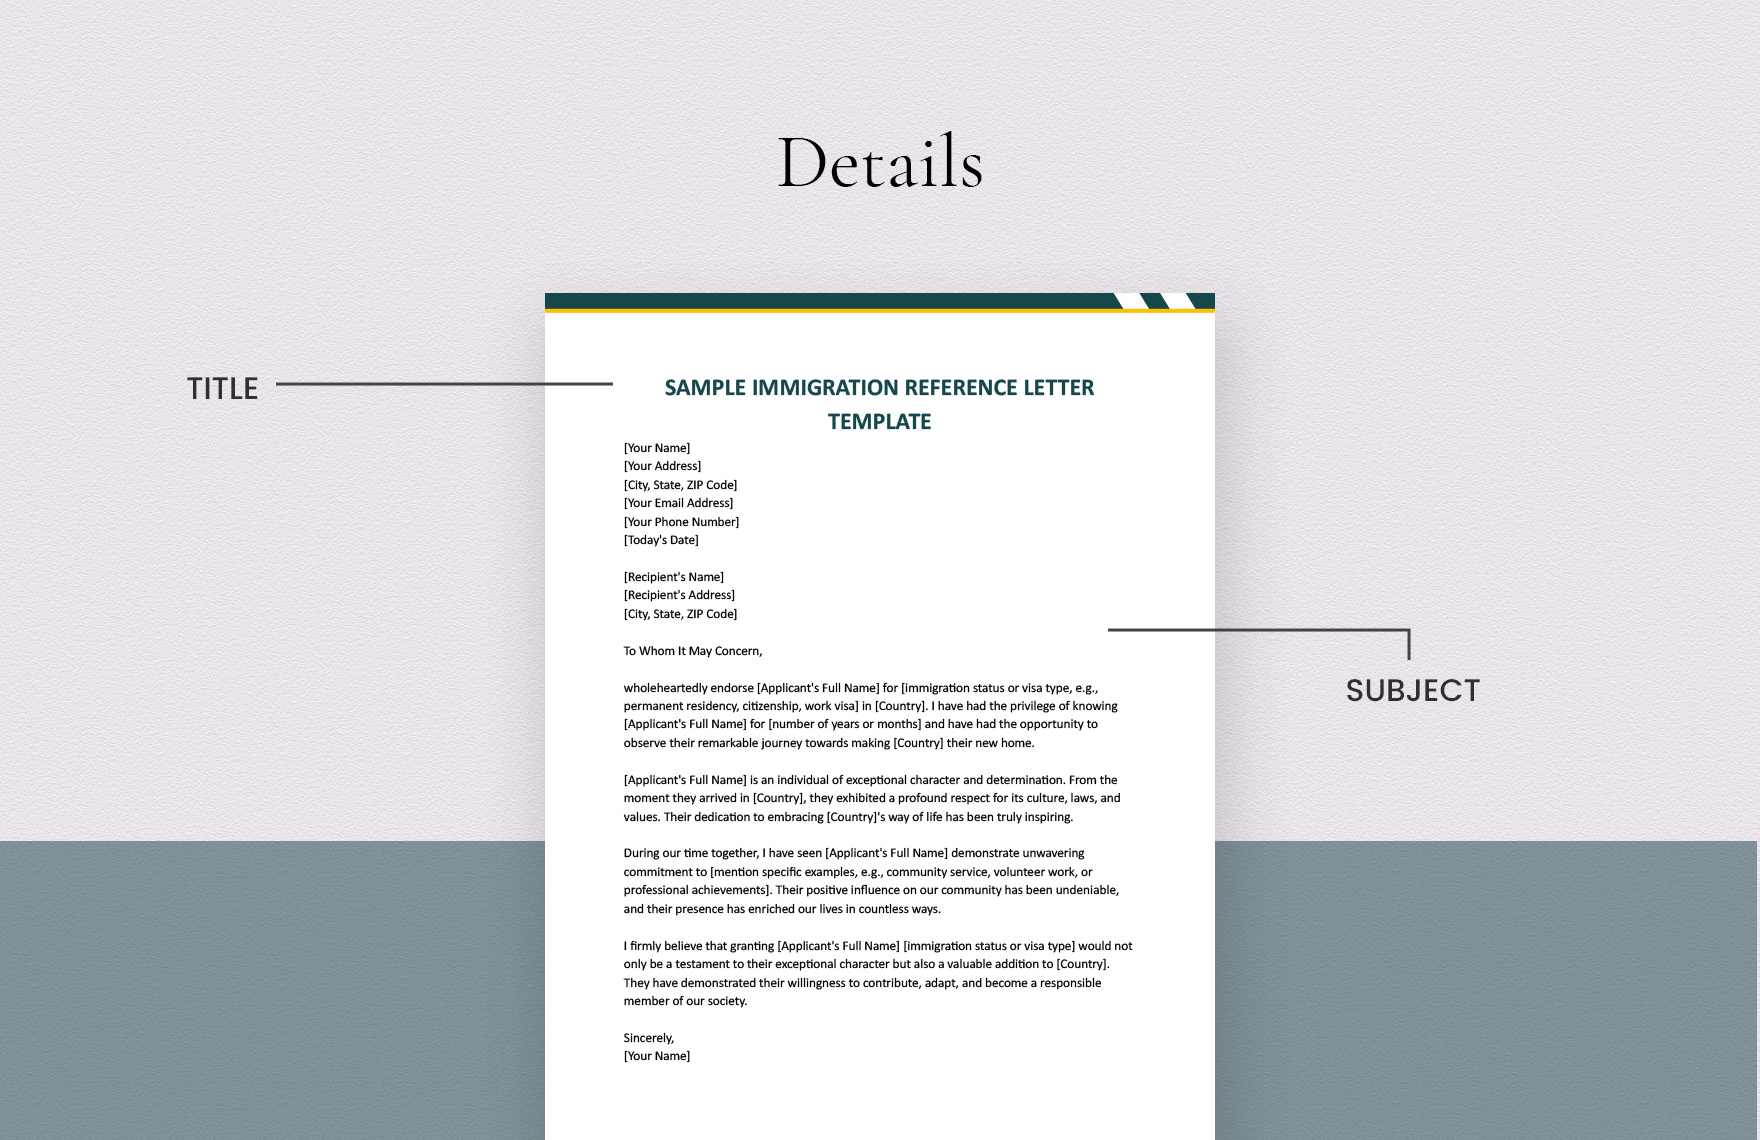 Sample Immigration Reference Letter Template